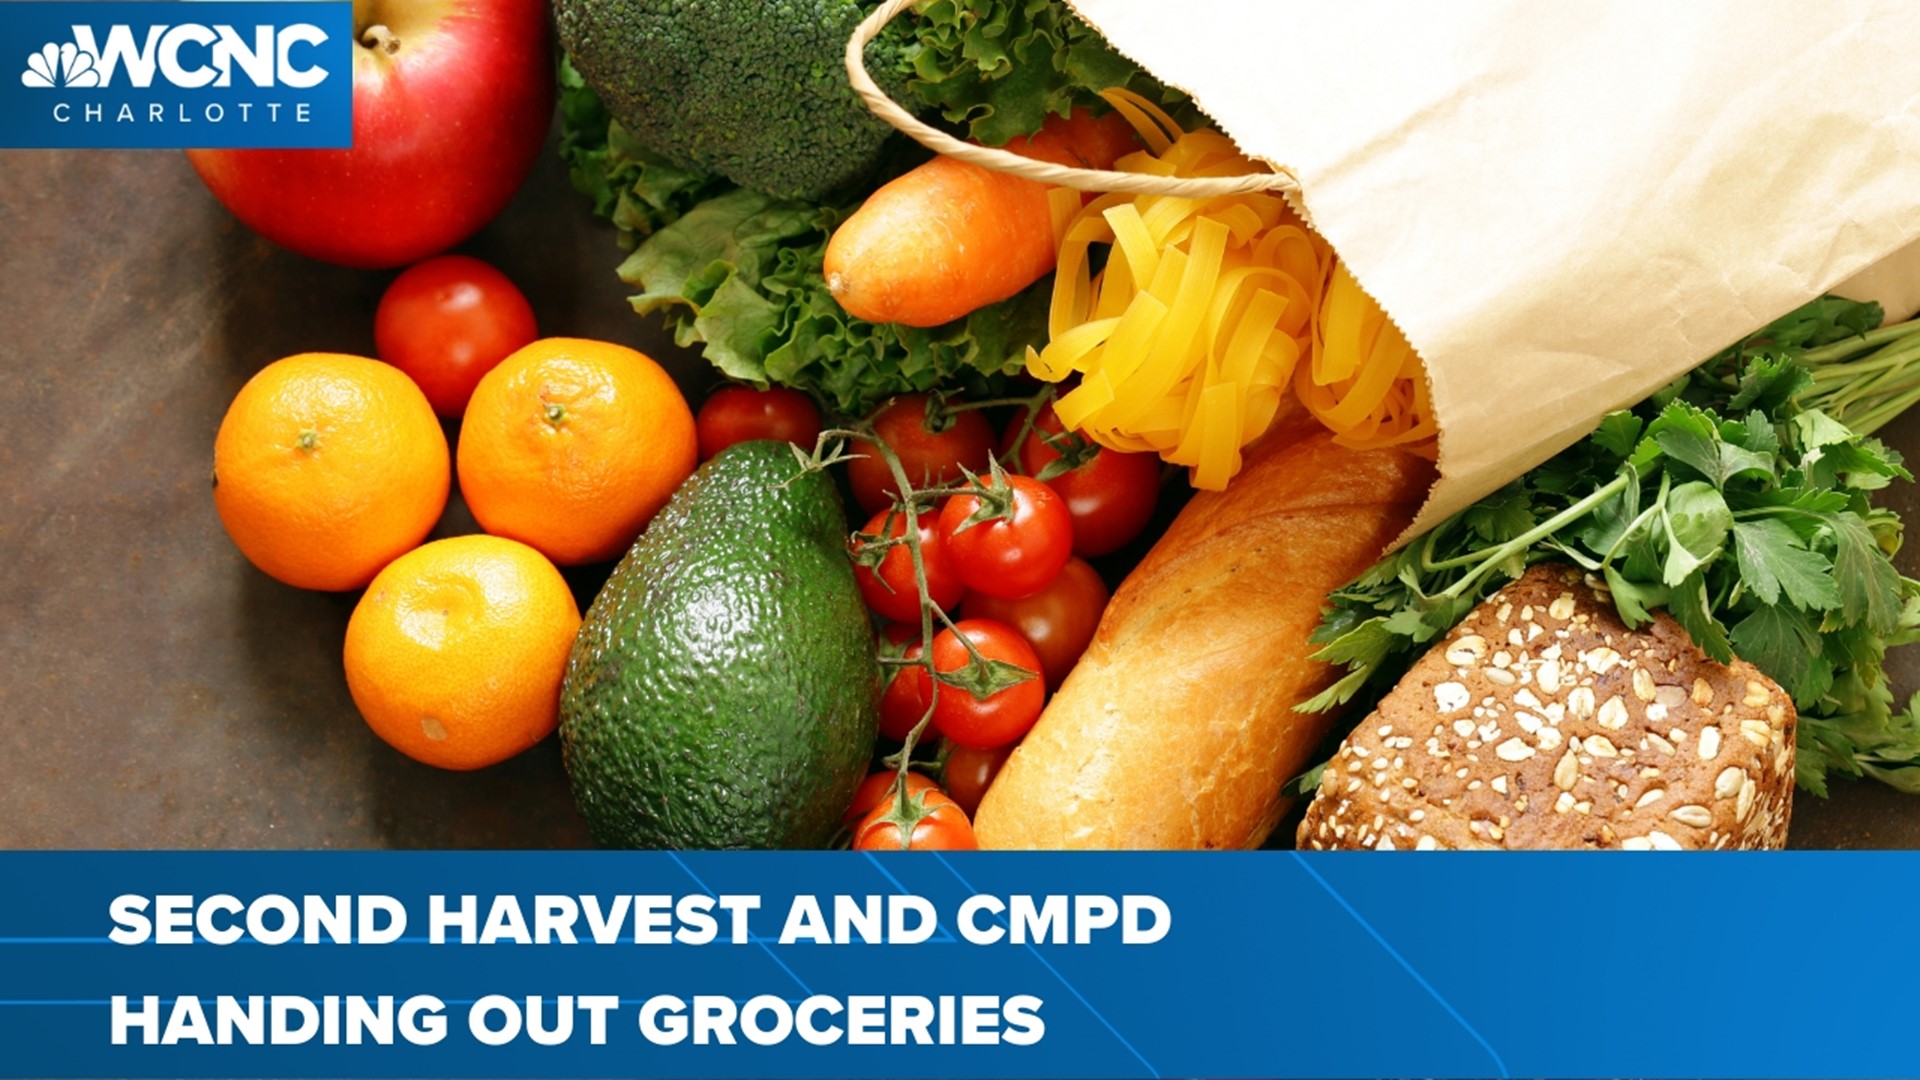 CMPD officers will hand out free groceries to folks in south Charlotte.